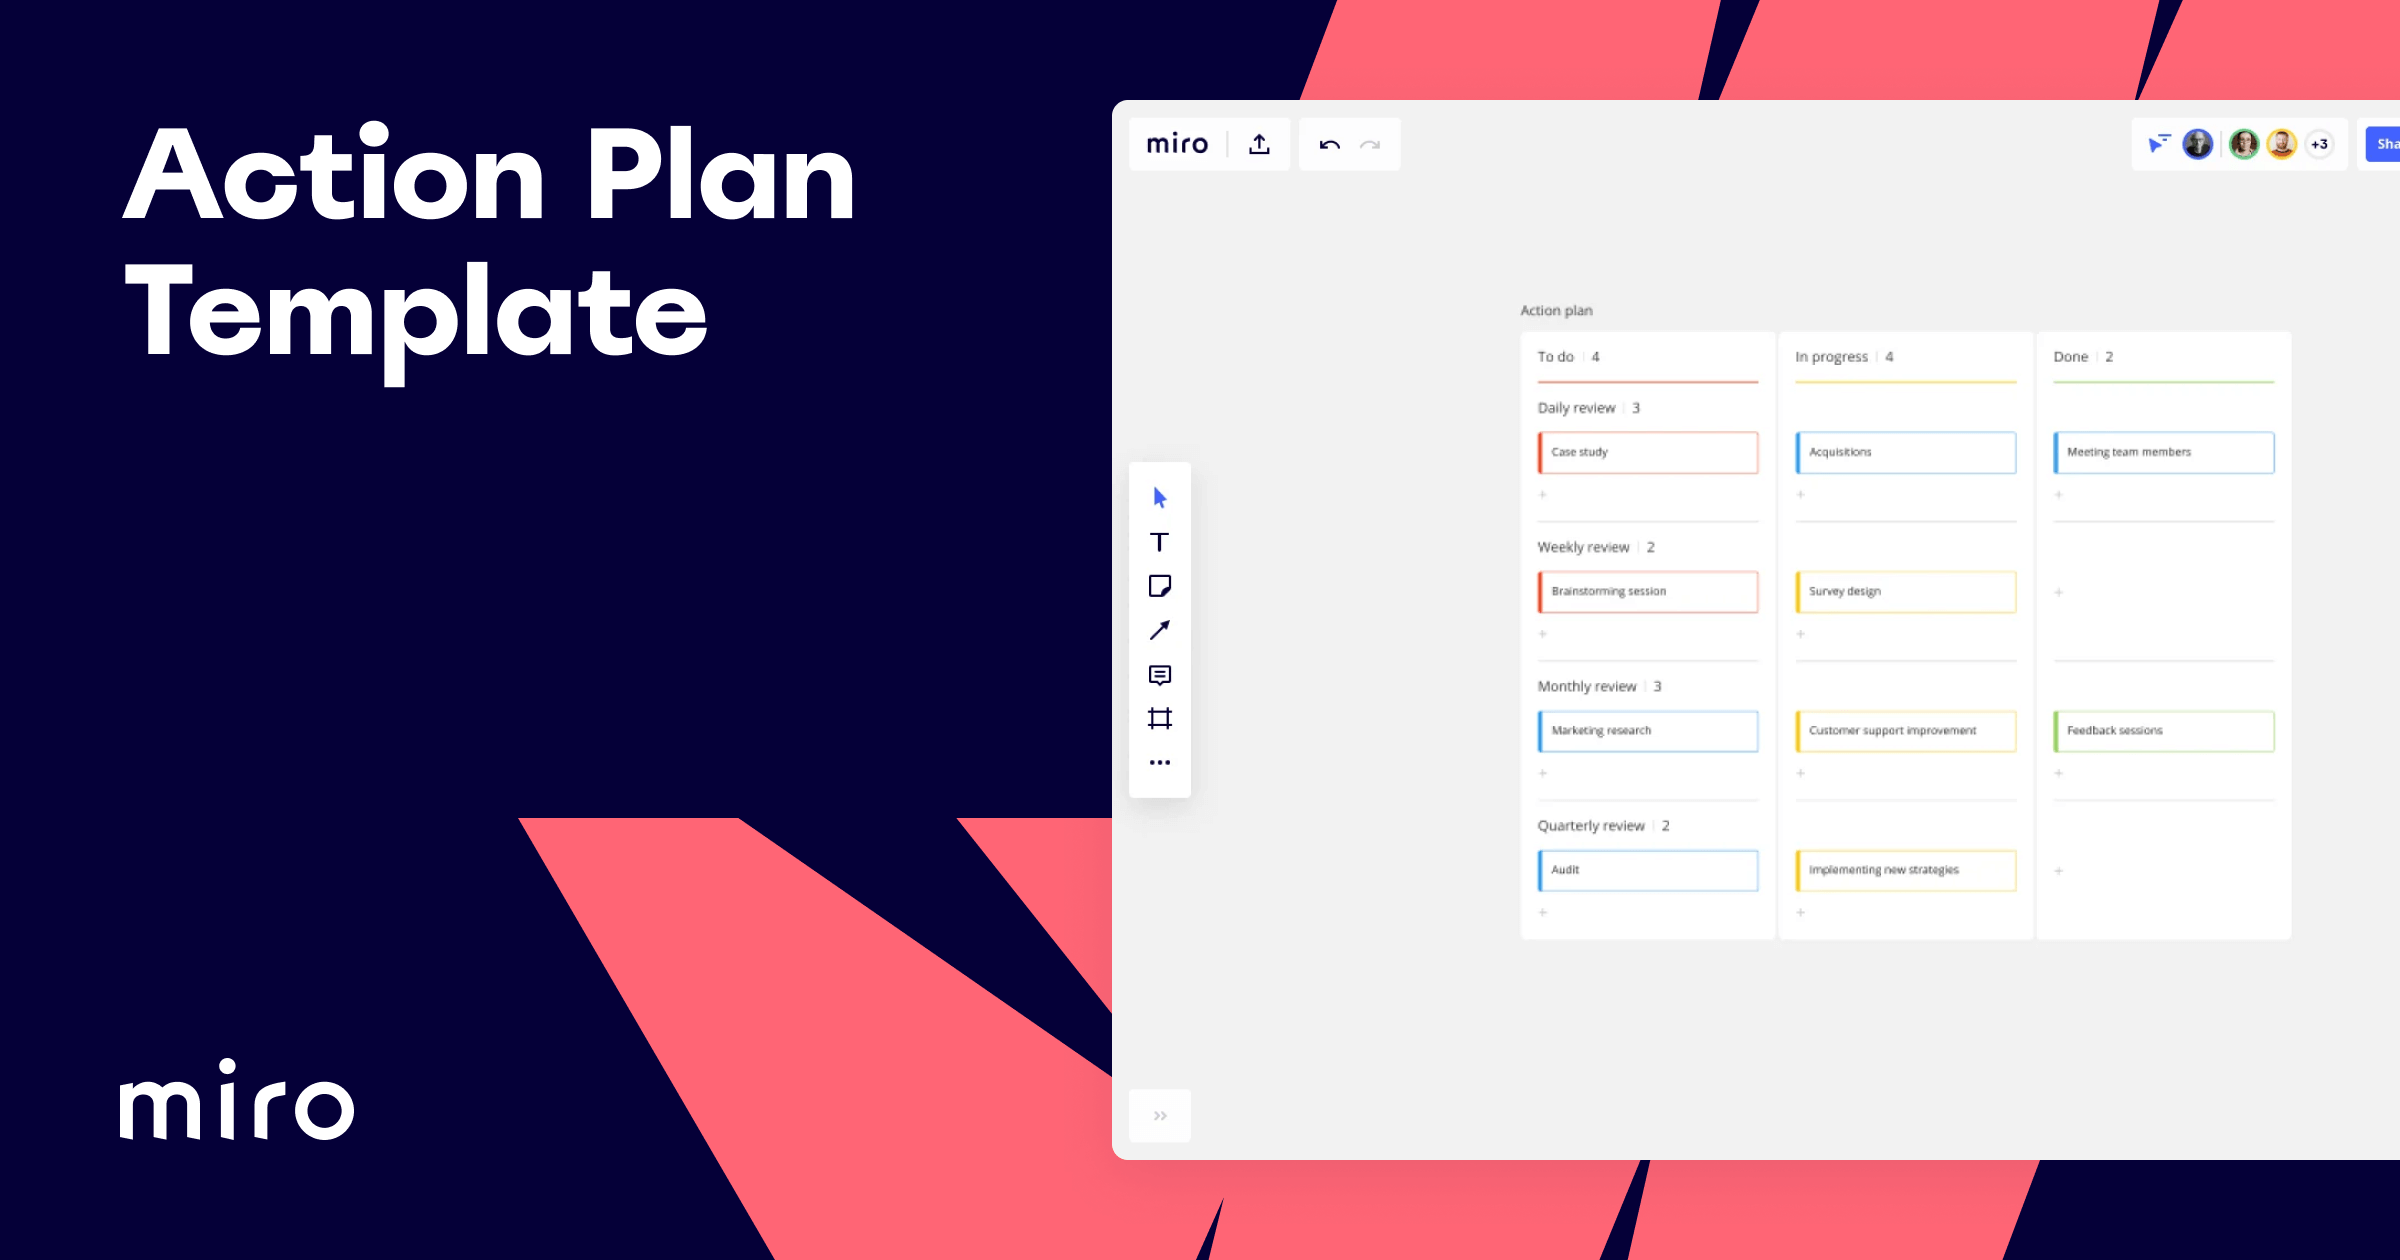 Action Plan Template: How To Write an Action Plan + Examples